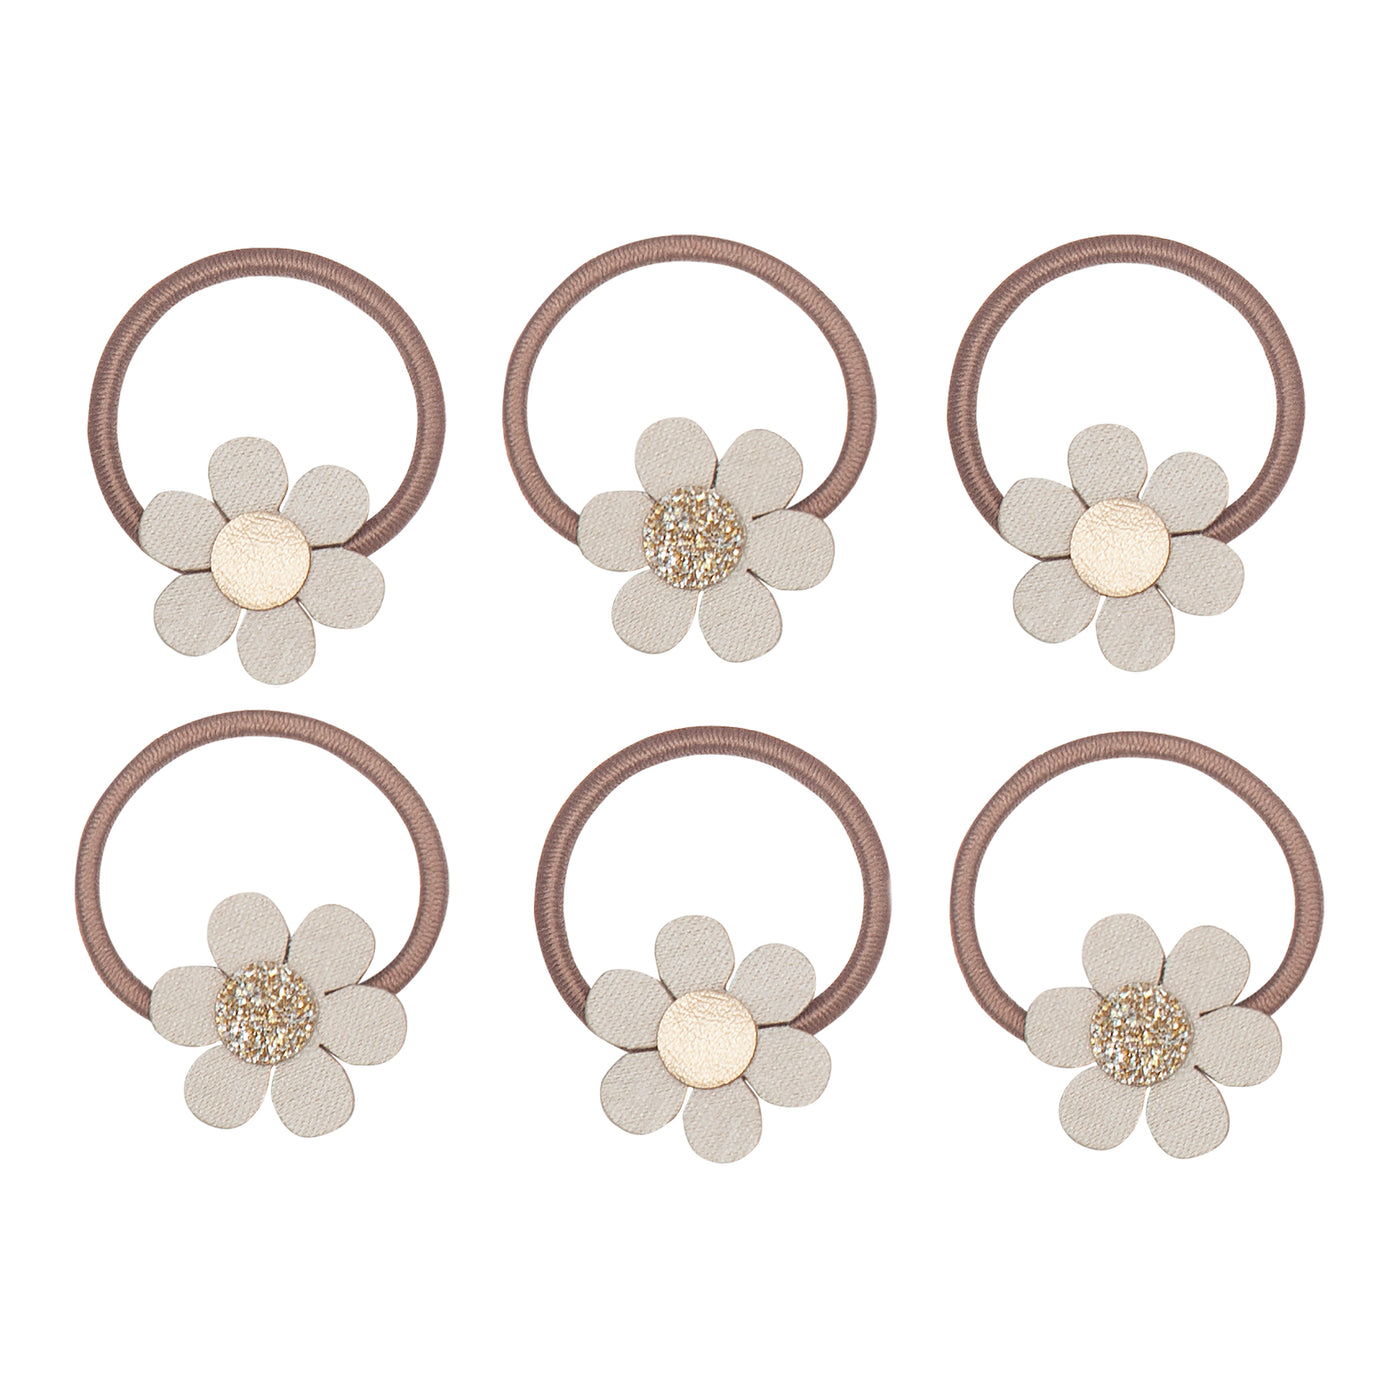 Six mini daisy ponies, featuring metallic gold and glitter centres, in a neutral colour palette 